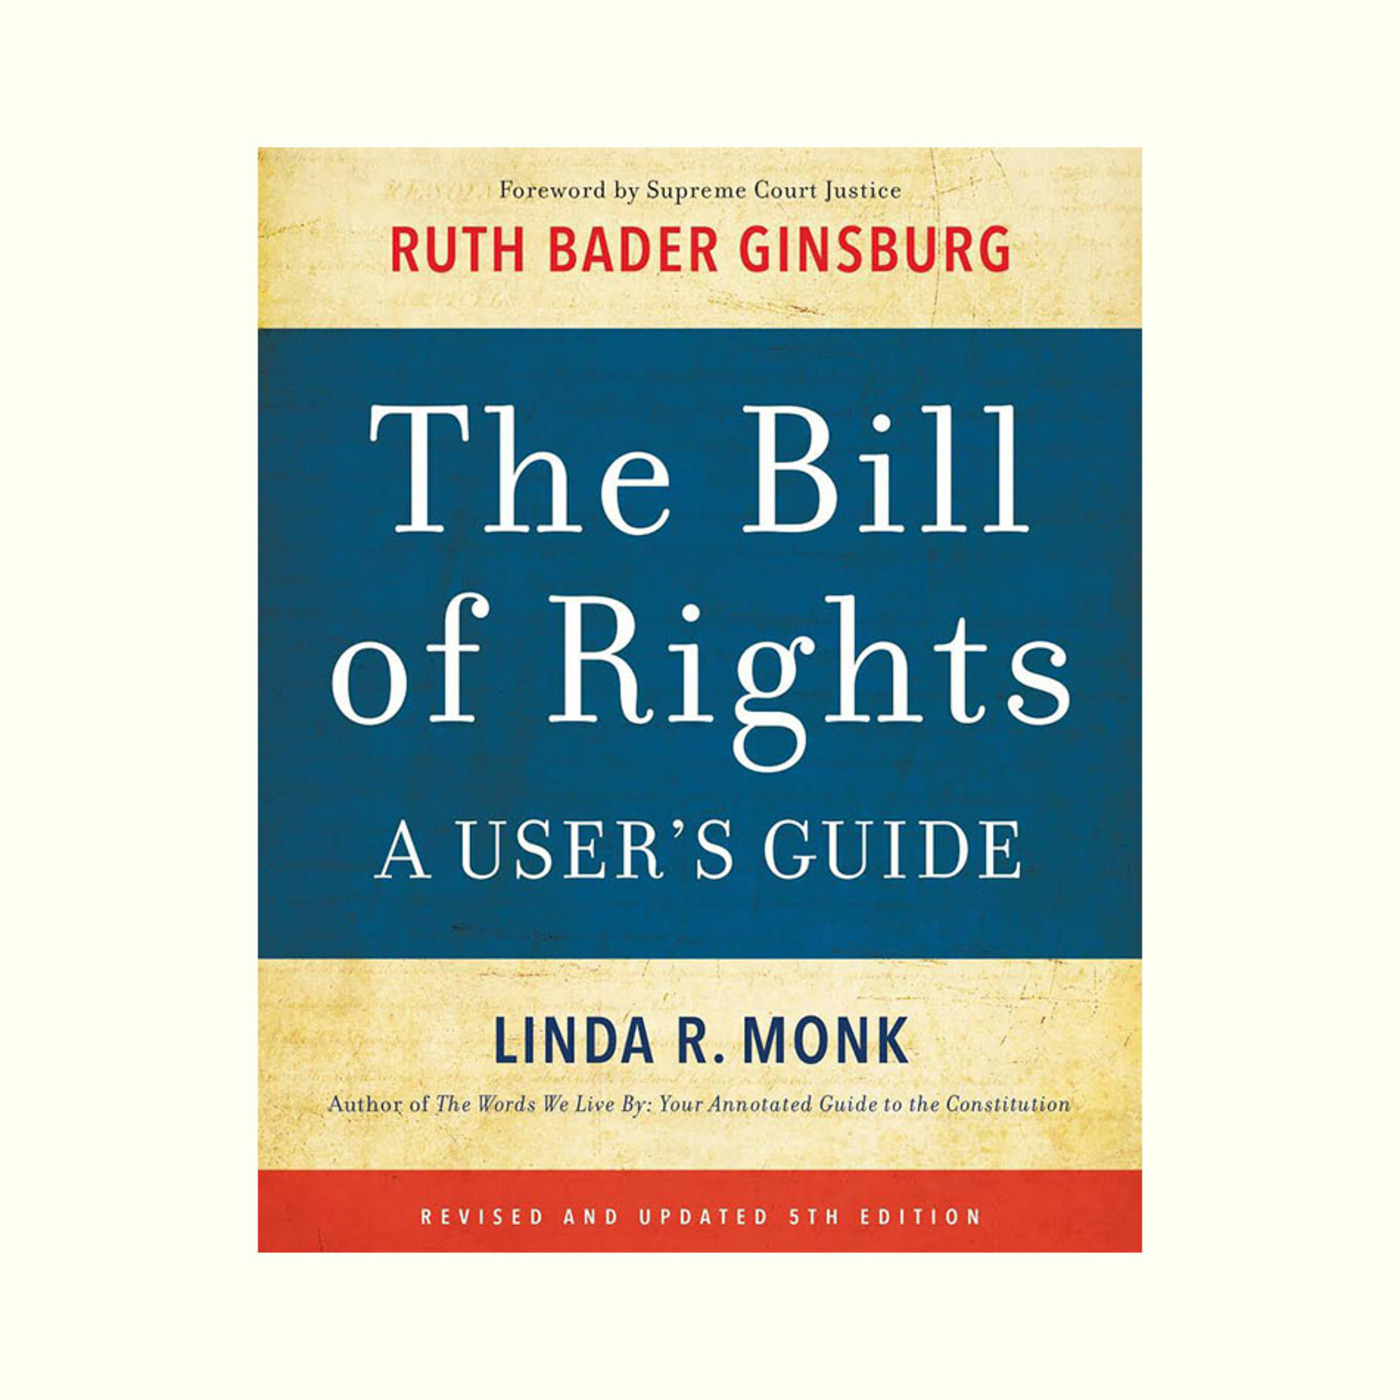 The Bill of Rights:  A User's Guide